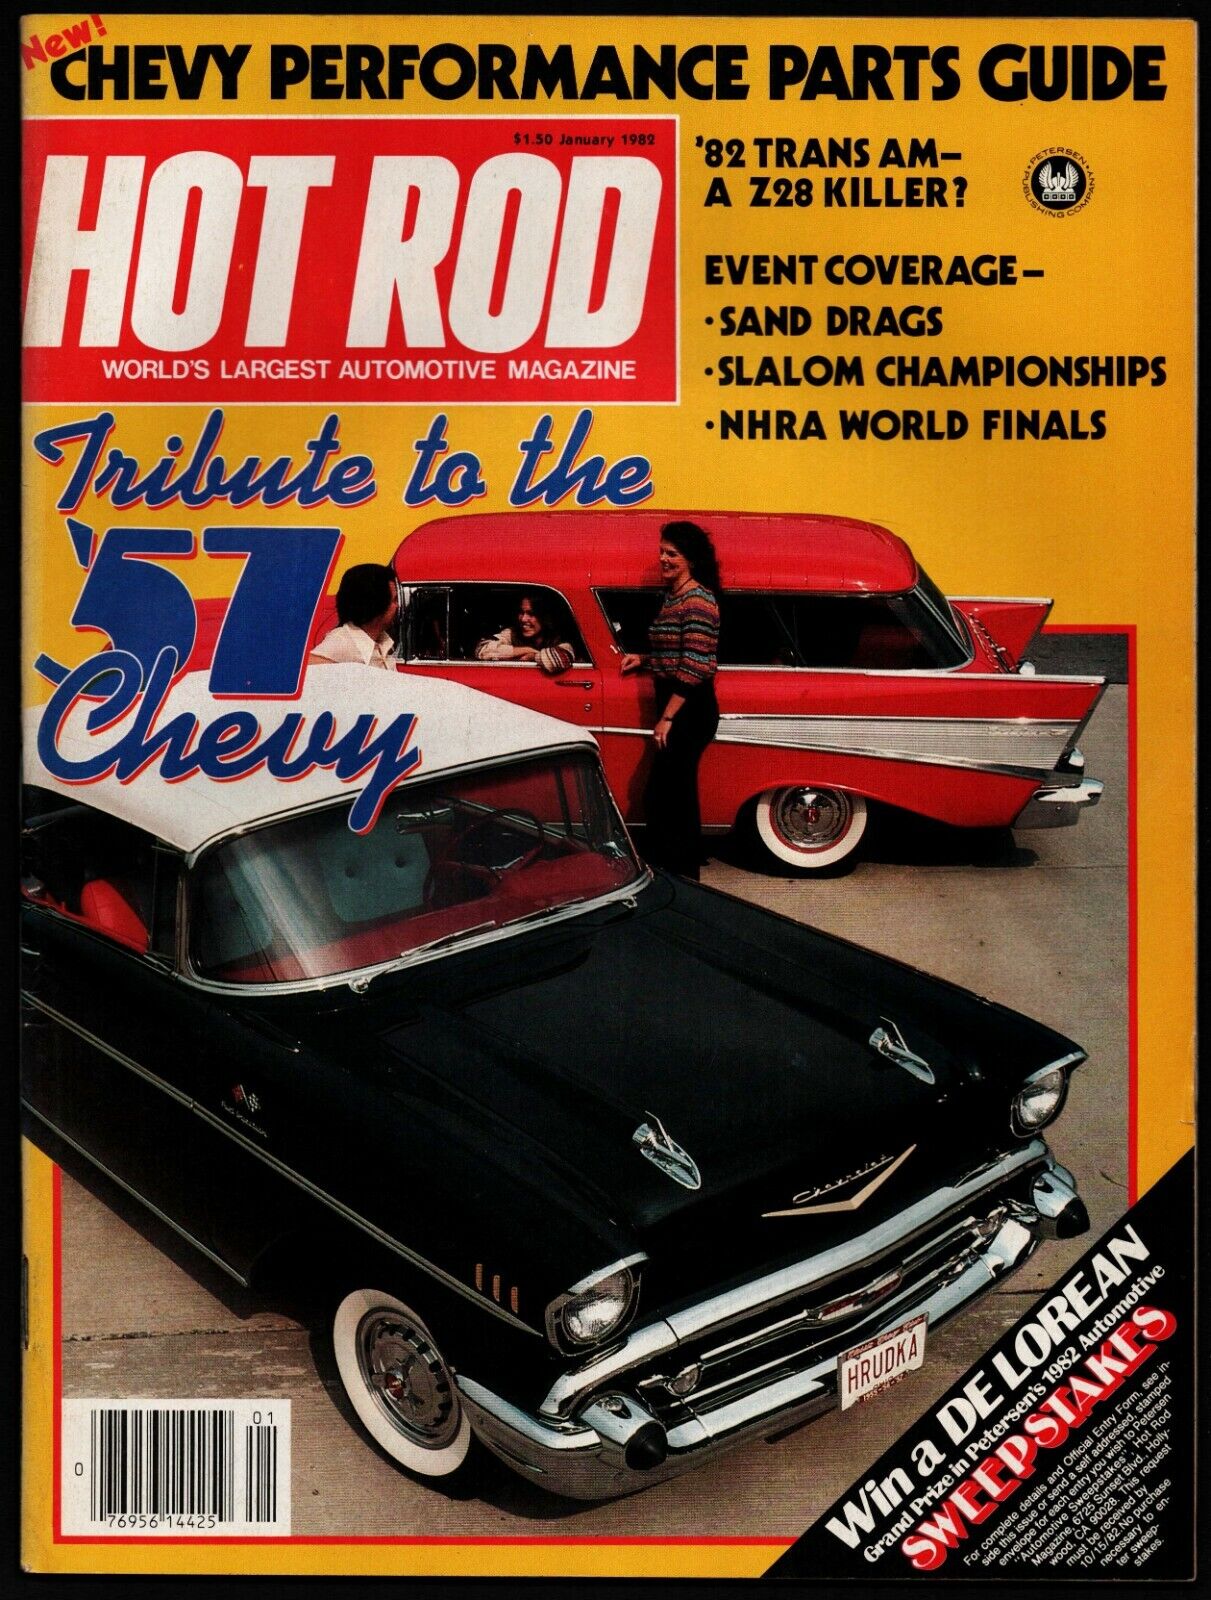 JANUARY 1982 HOT ROD MAGAZINE, TRIBUTE TO THE 57 CHEVY, \'82 TRANS AM, SAND DRAGS